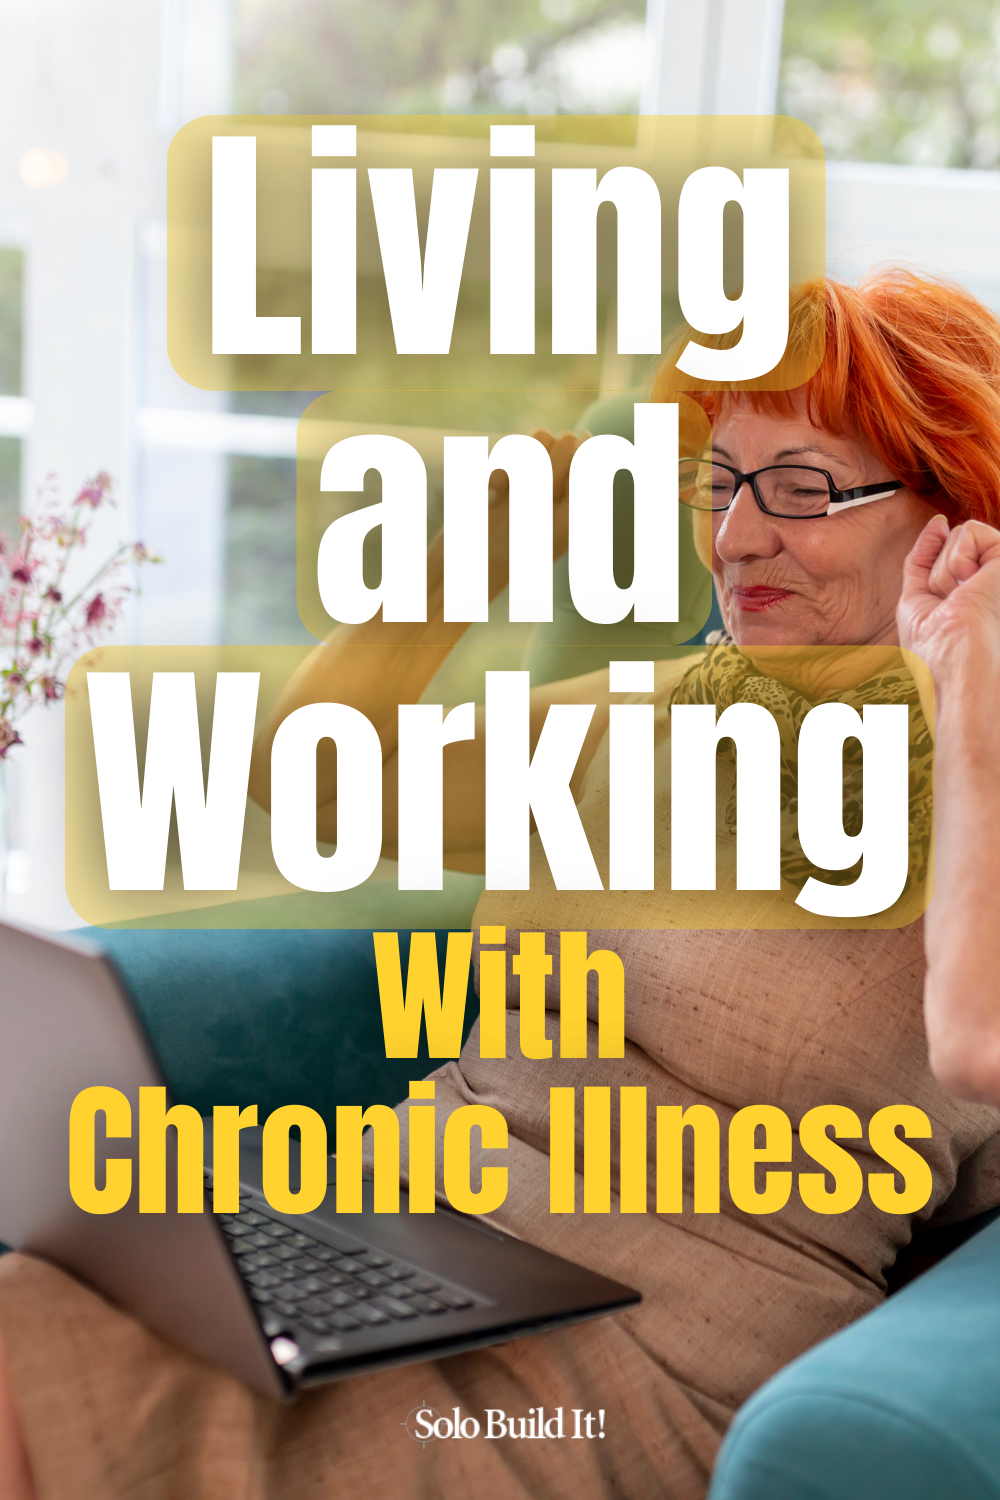 Working From Home With Chronic Illness: 10 Proven Tips